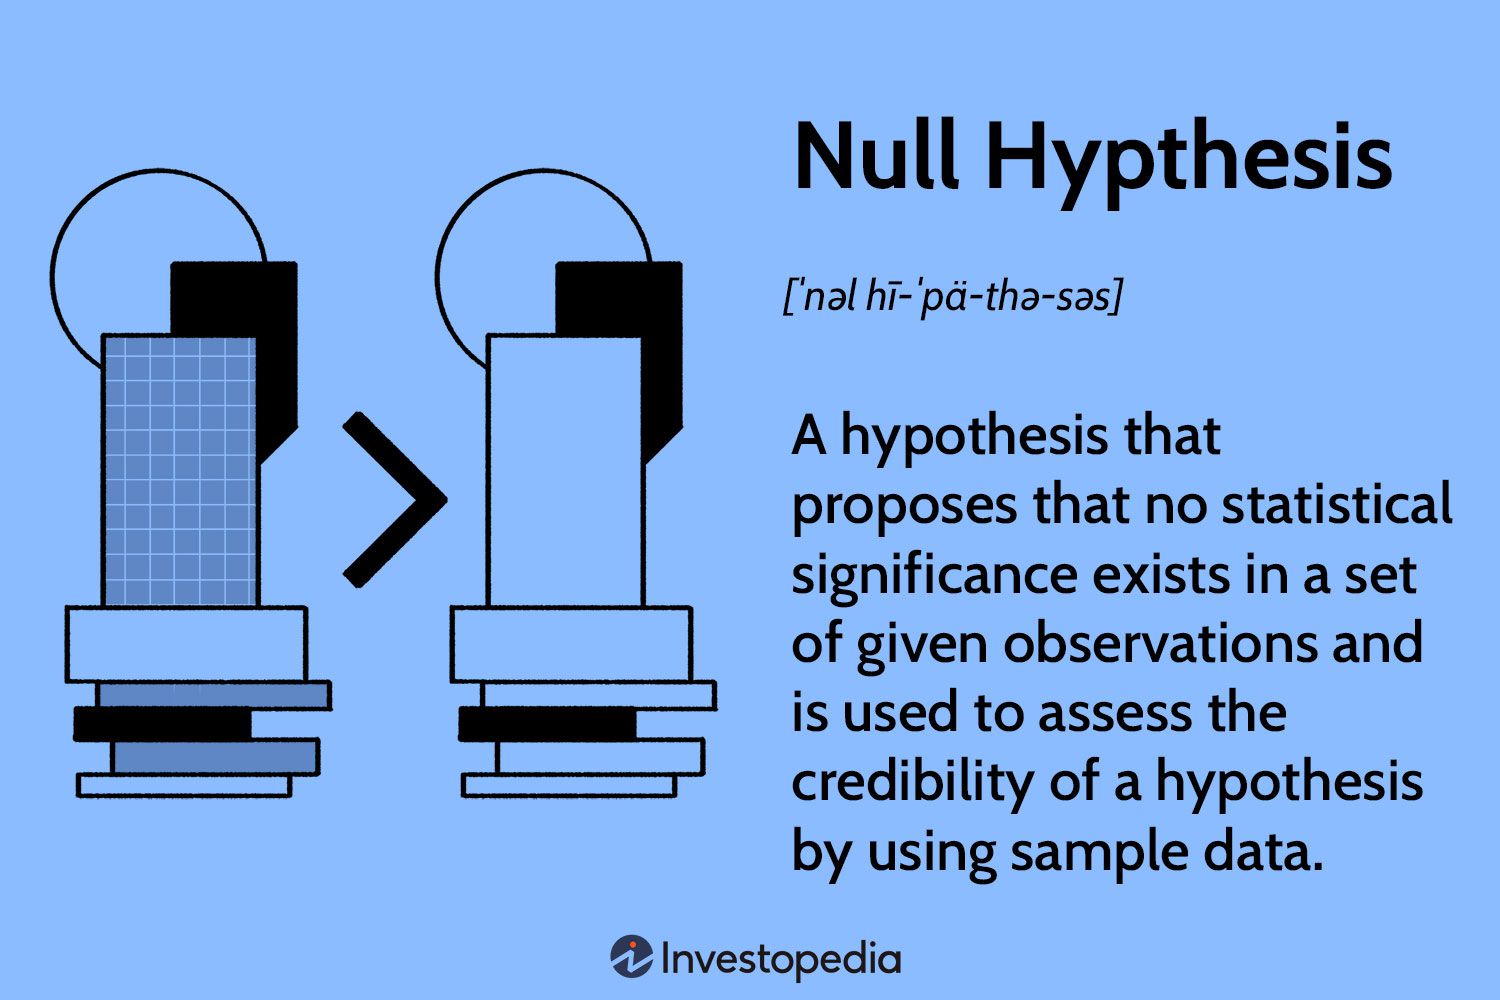 null hypothesis is a negative statement